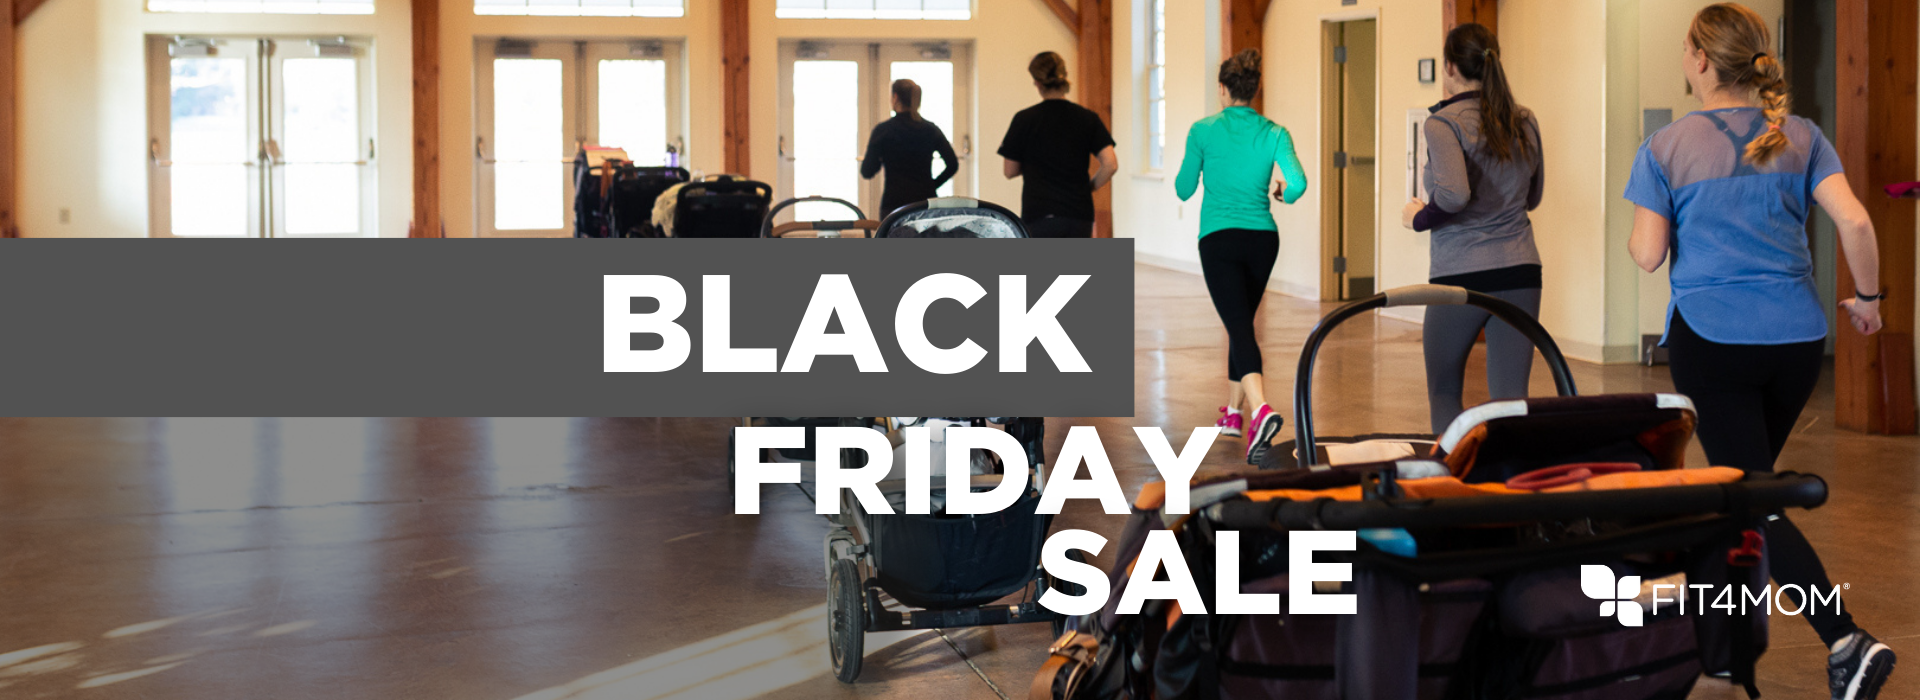 Black Friday sales from FIT4MOM mom workout group.png